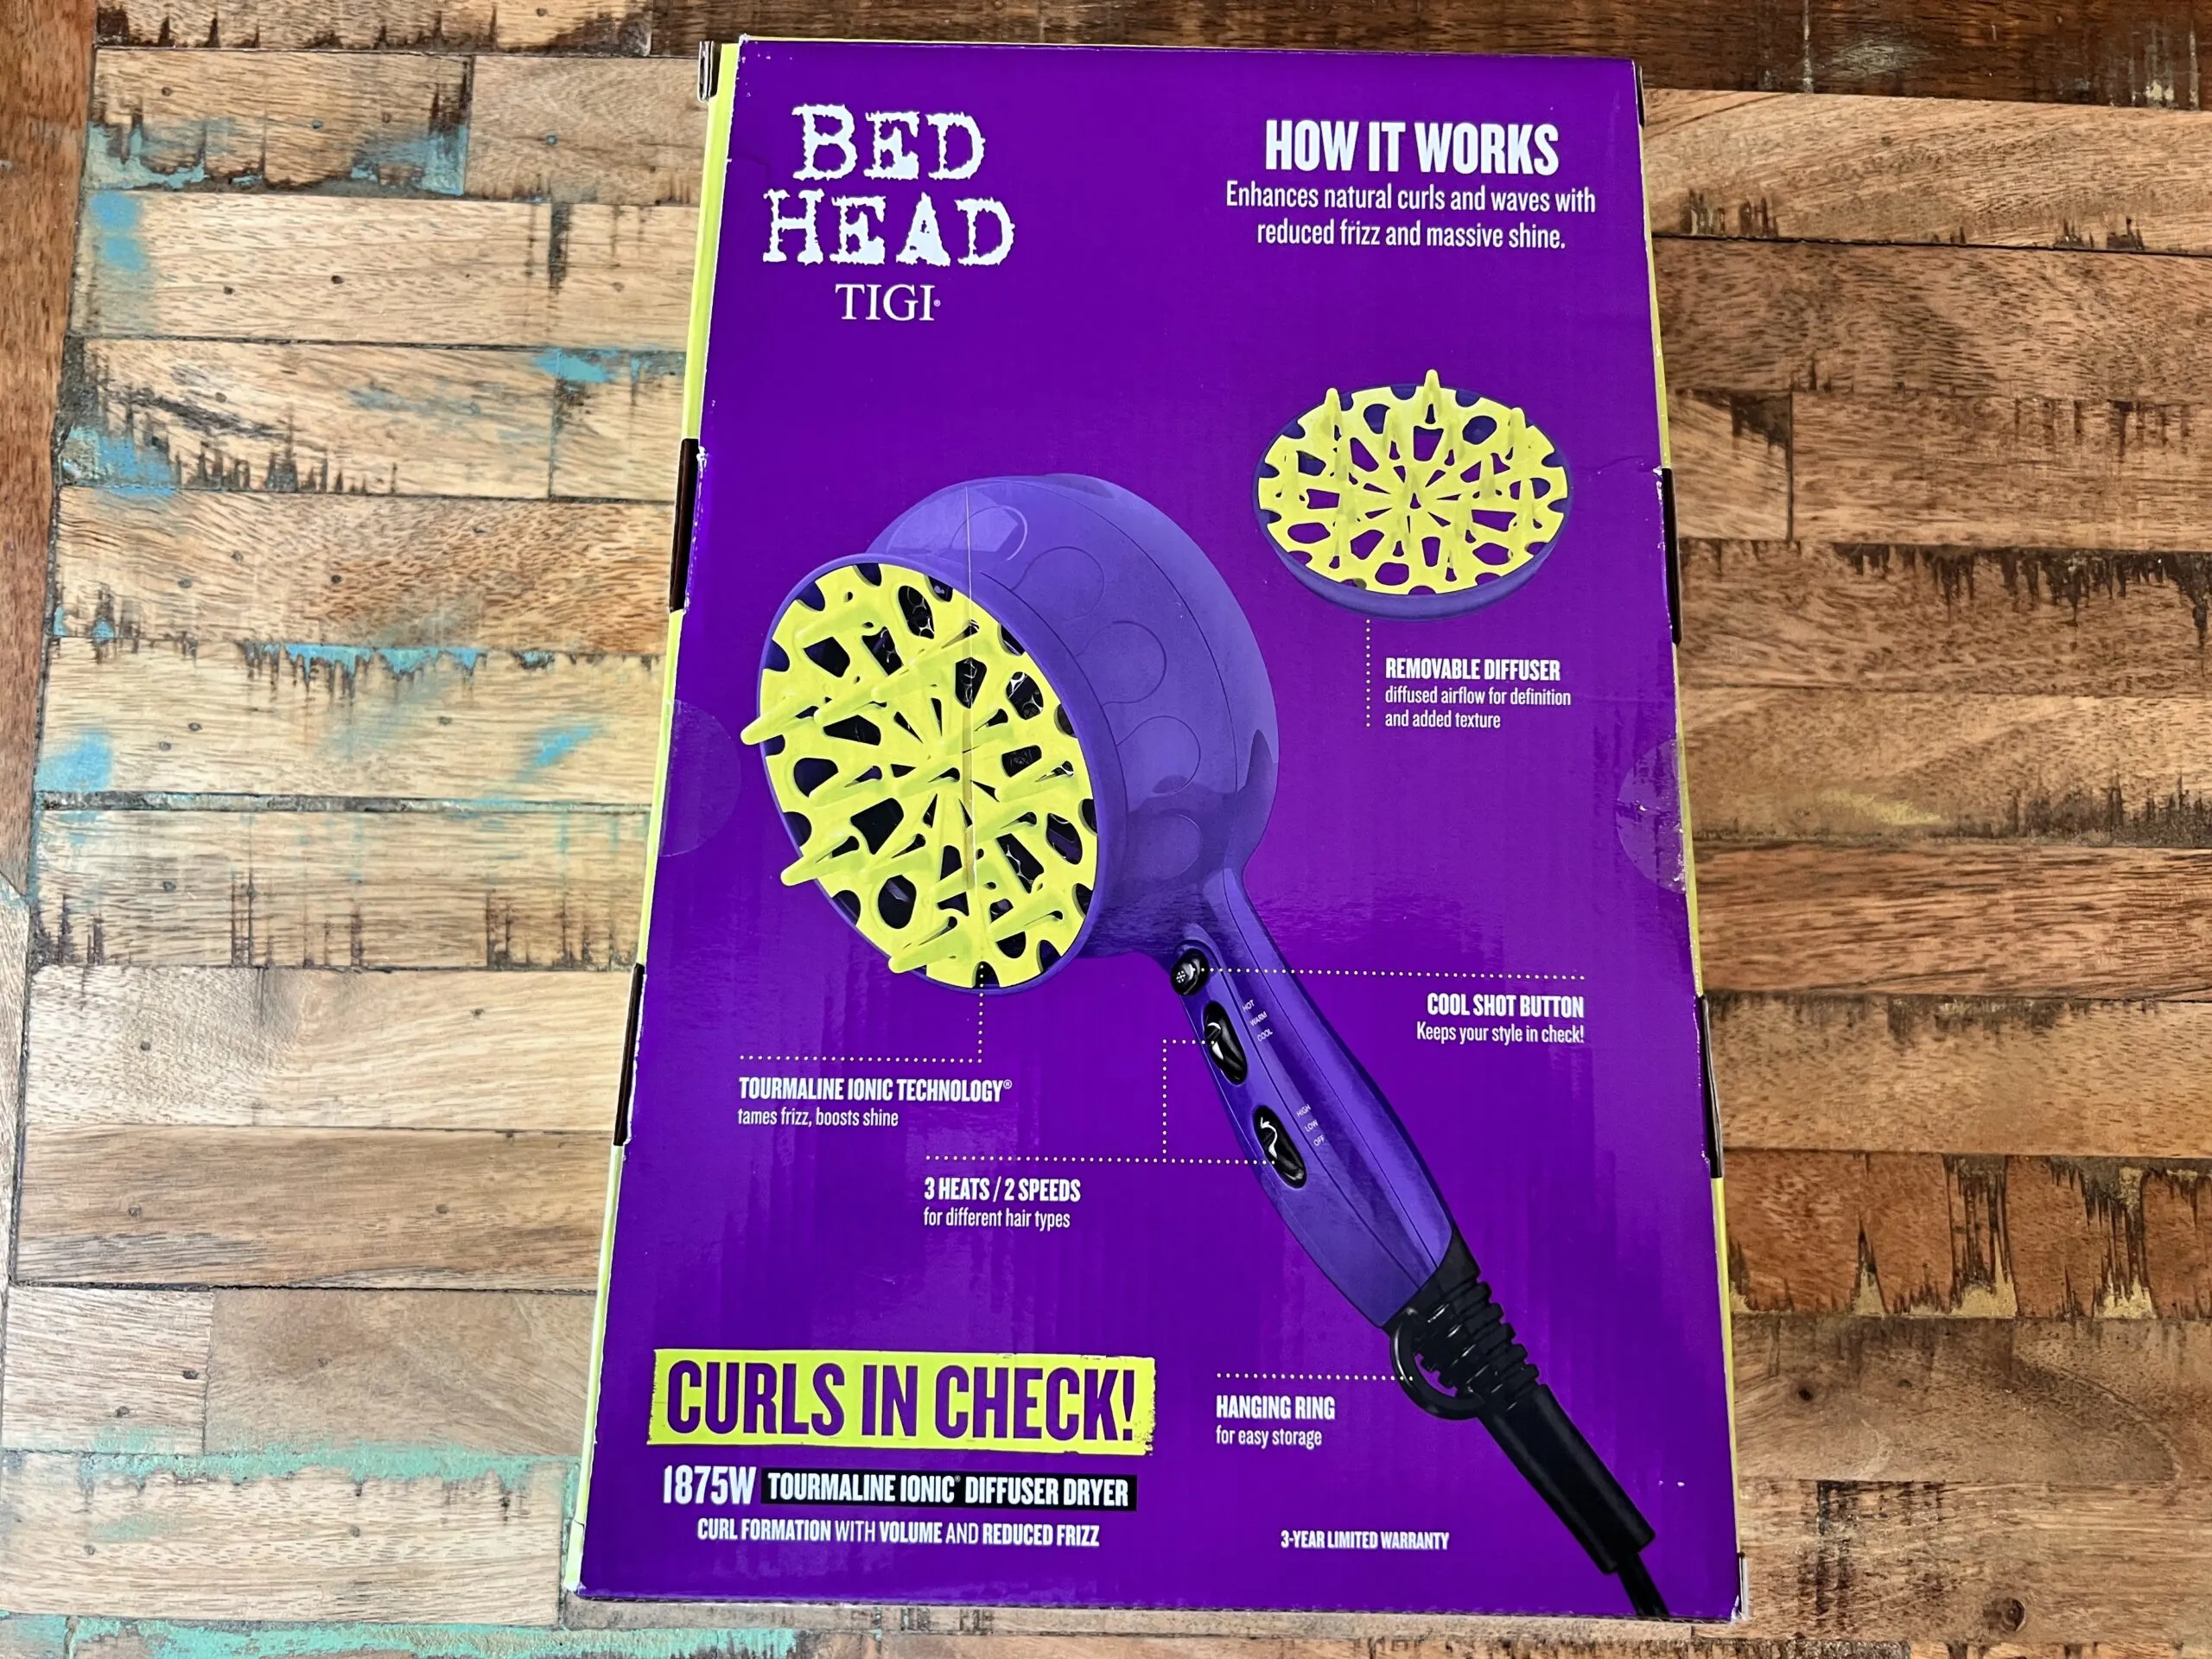 The Bed Head TIGI 1875-watt tourmaline ionic diffuser dryer works to enhance your natural curls and waves with reduced frizz and massive shine. The box also included a removable diffuser to pair with the diffuser dryer that comes with a cool shot button, hanging ring, 3 heats, and 2 speeds.